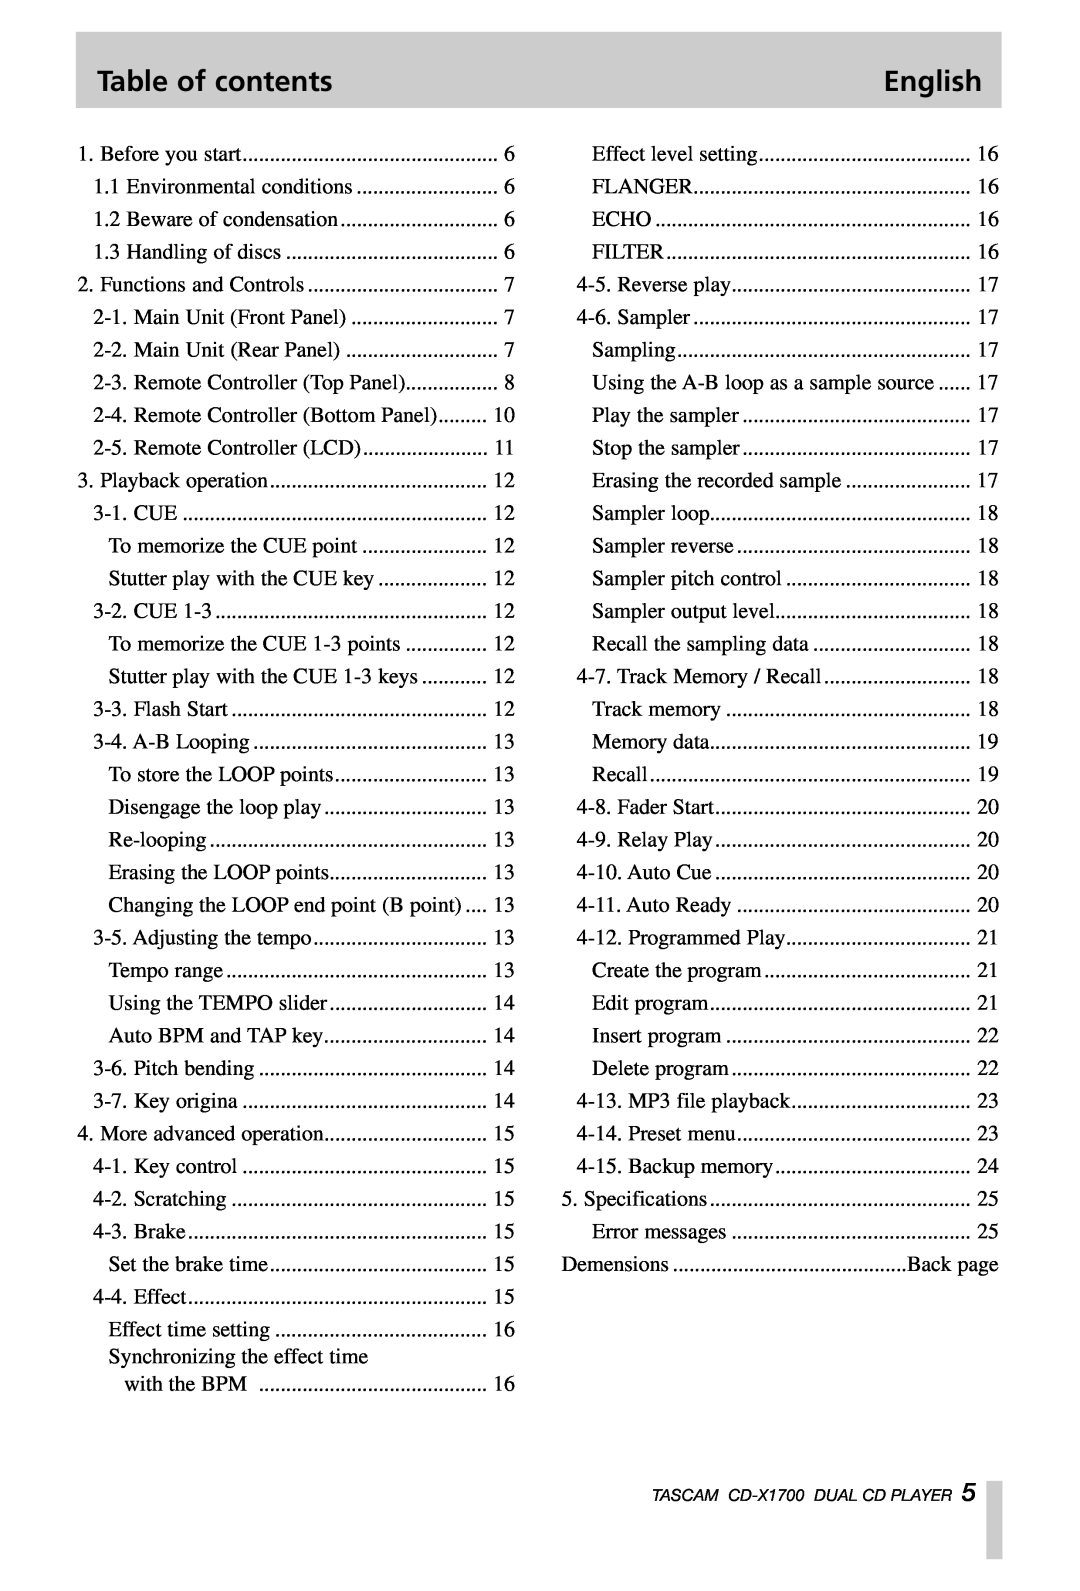 Tascam CD-X1700 owner manual Table of contents, English 